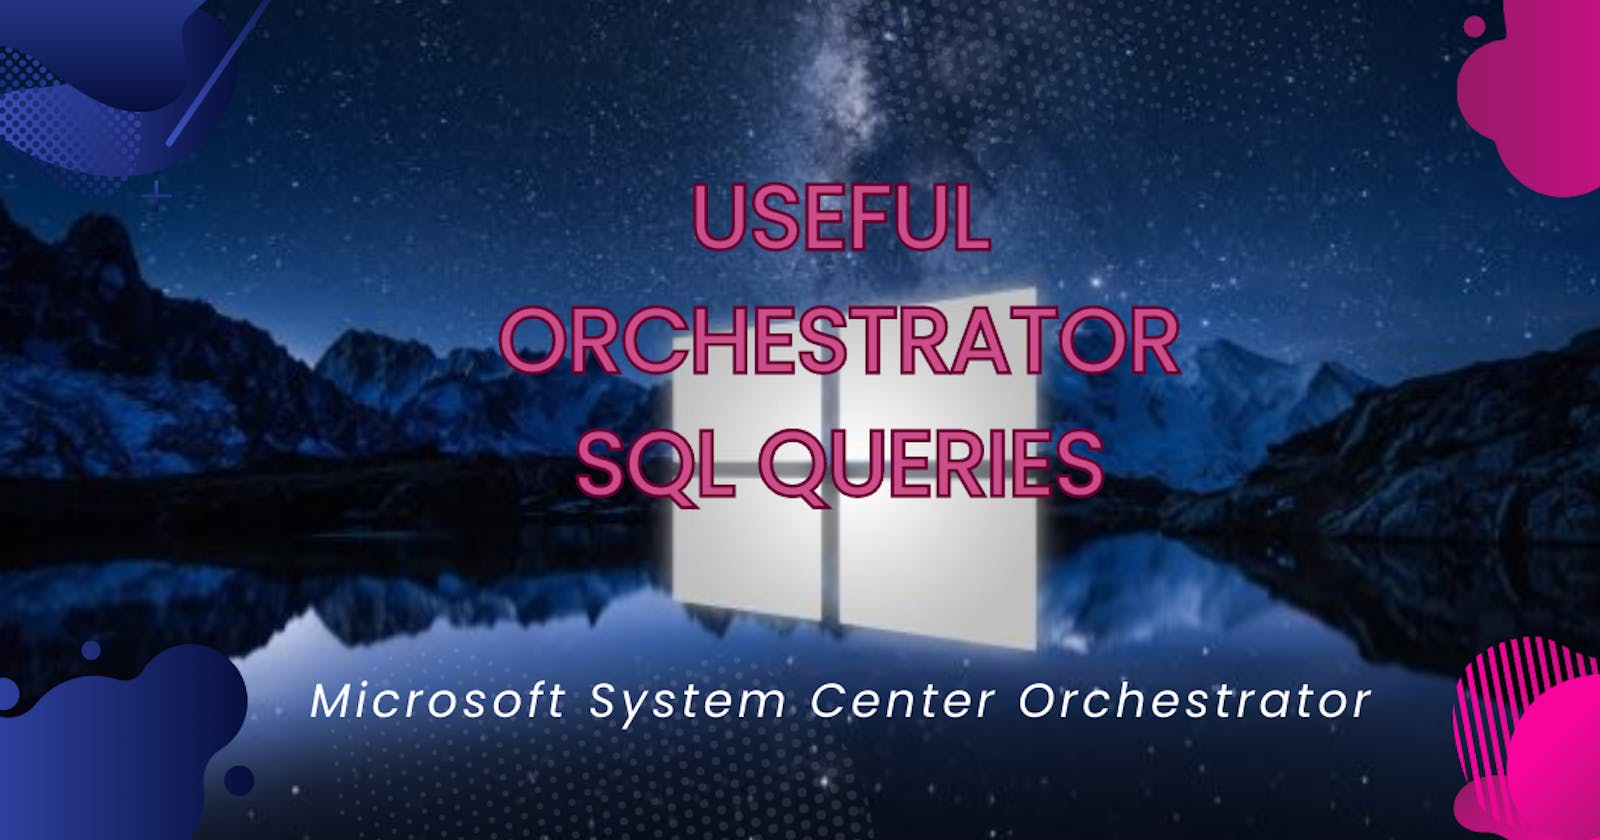 SCORCH: Useful Orchestrator SQL Queries